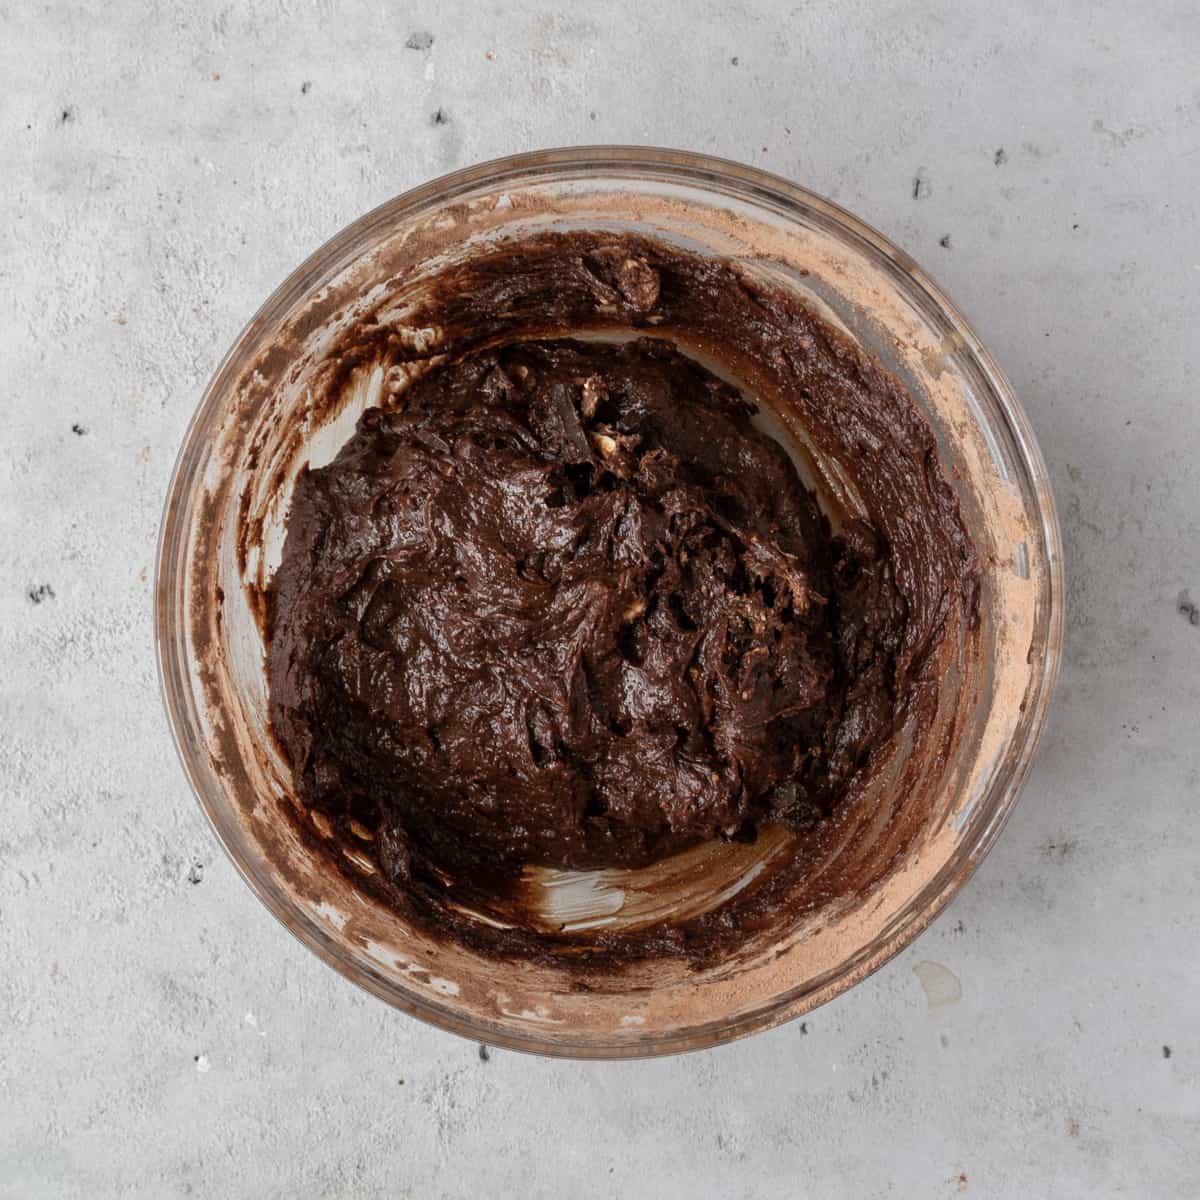 the completed brownie batter in a glass bowl on a grey background.